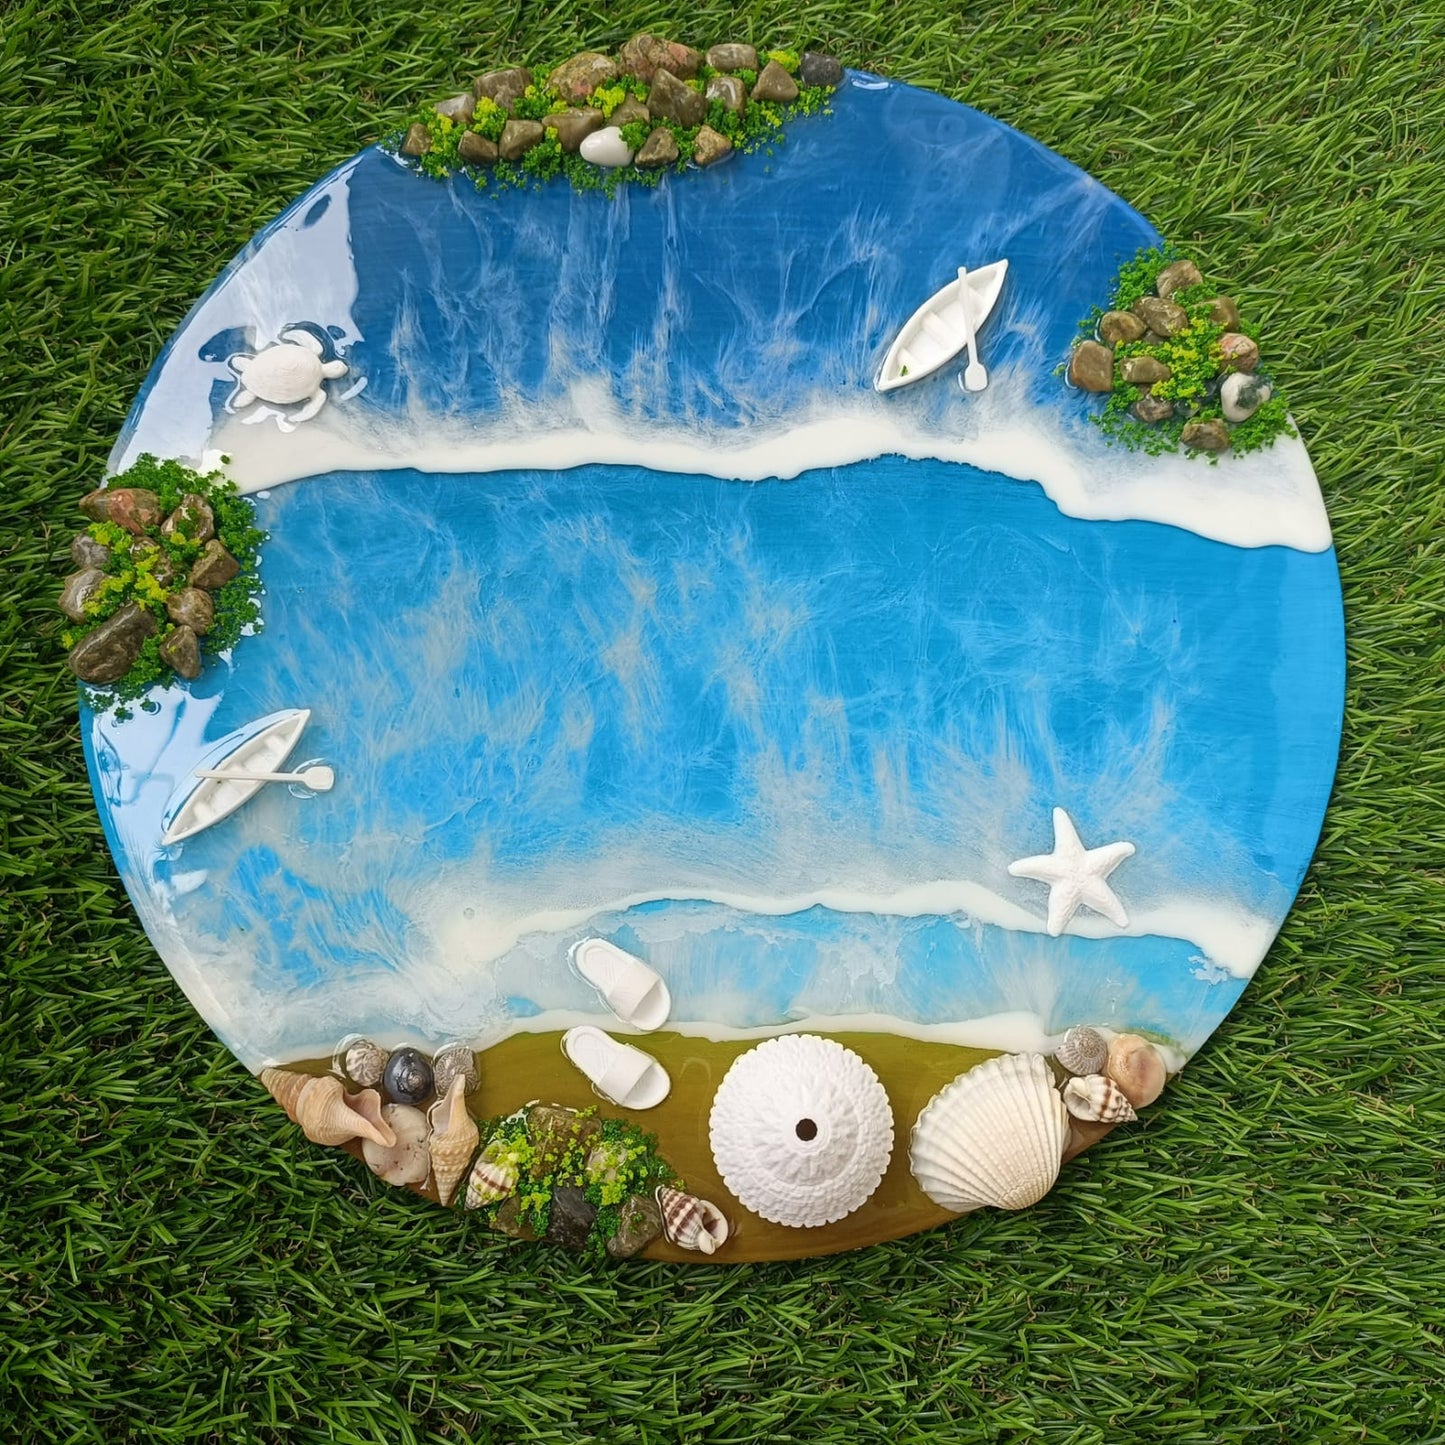 Resin Wall Decor With Ocean Beach Effect For Gallery Wall, Corporate Gift, Decorative Purposes, Tabletop Display